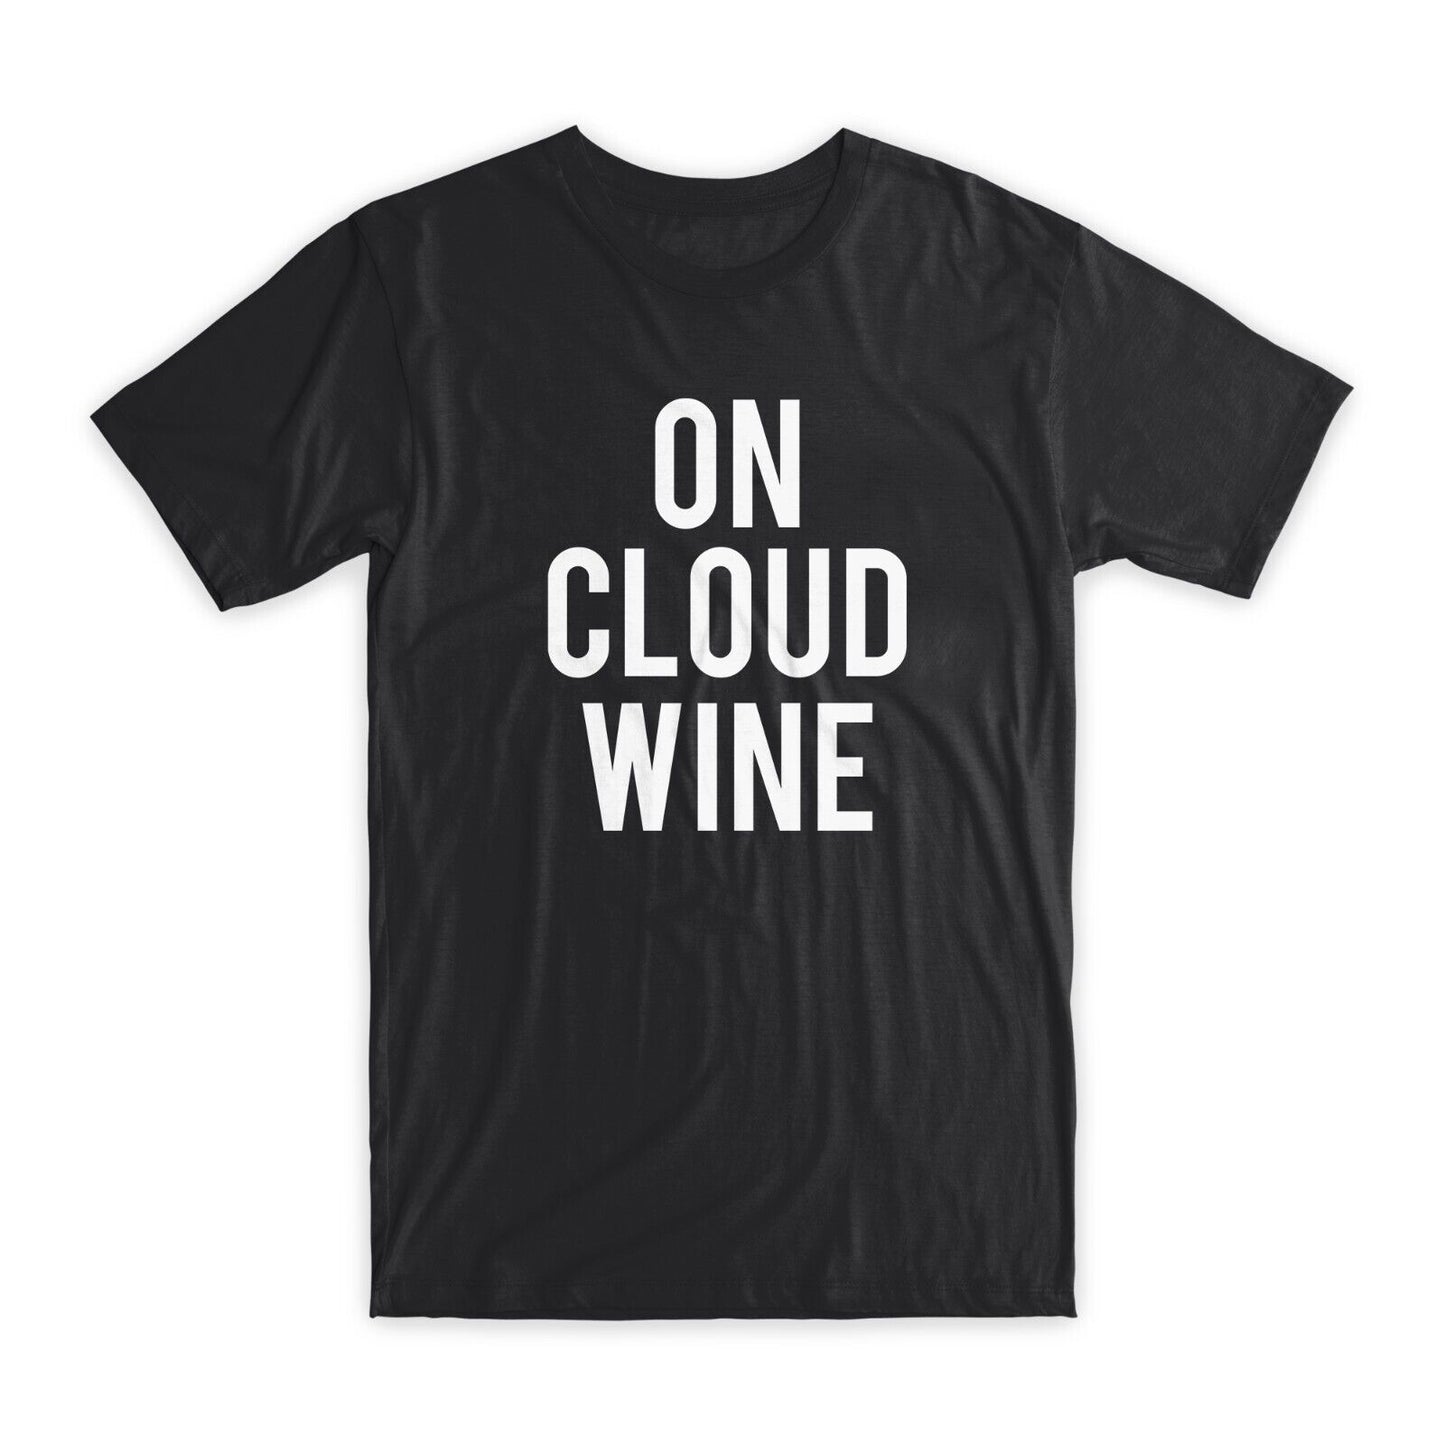 On Cloud Wine T-Shirt Premium Soft Cotton Crew Neck Funny Tees Novelty Gifts NEW